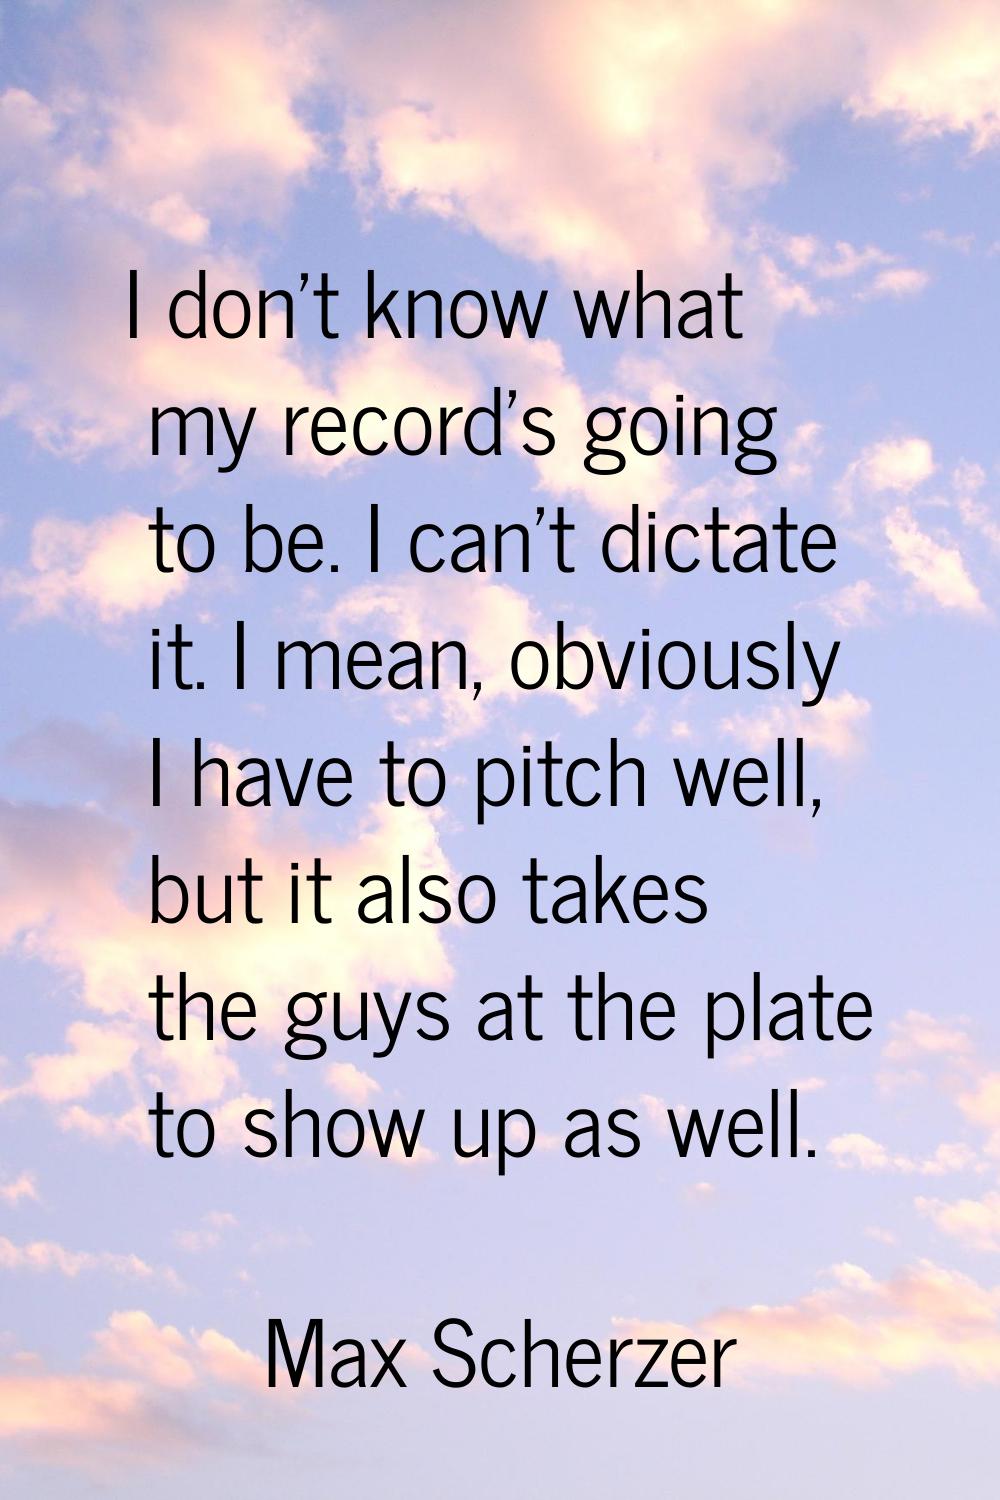 I don't know what my record's going to be. I can't dictate it. I mean, obviously I have to pitch we